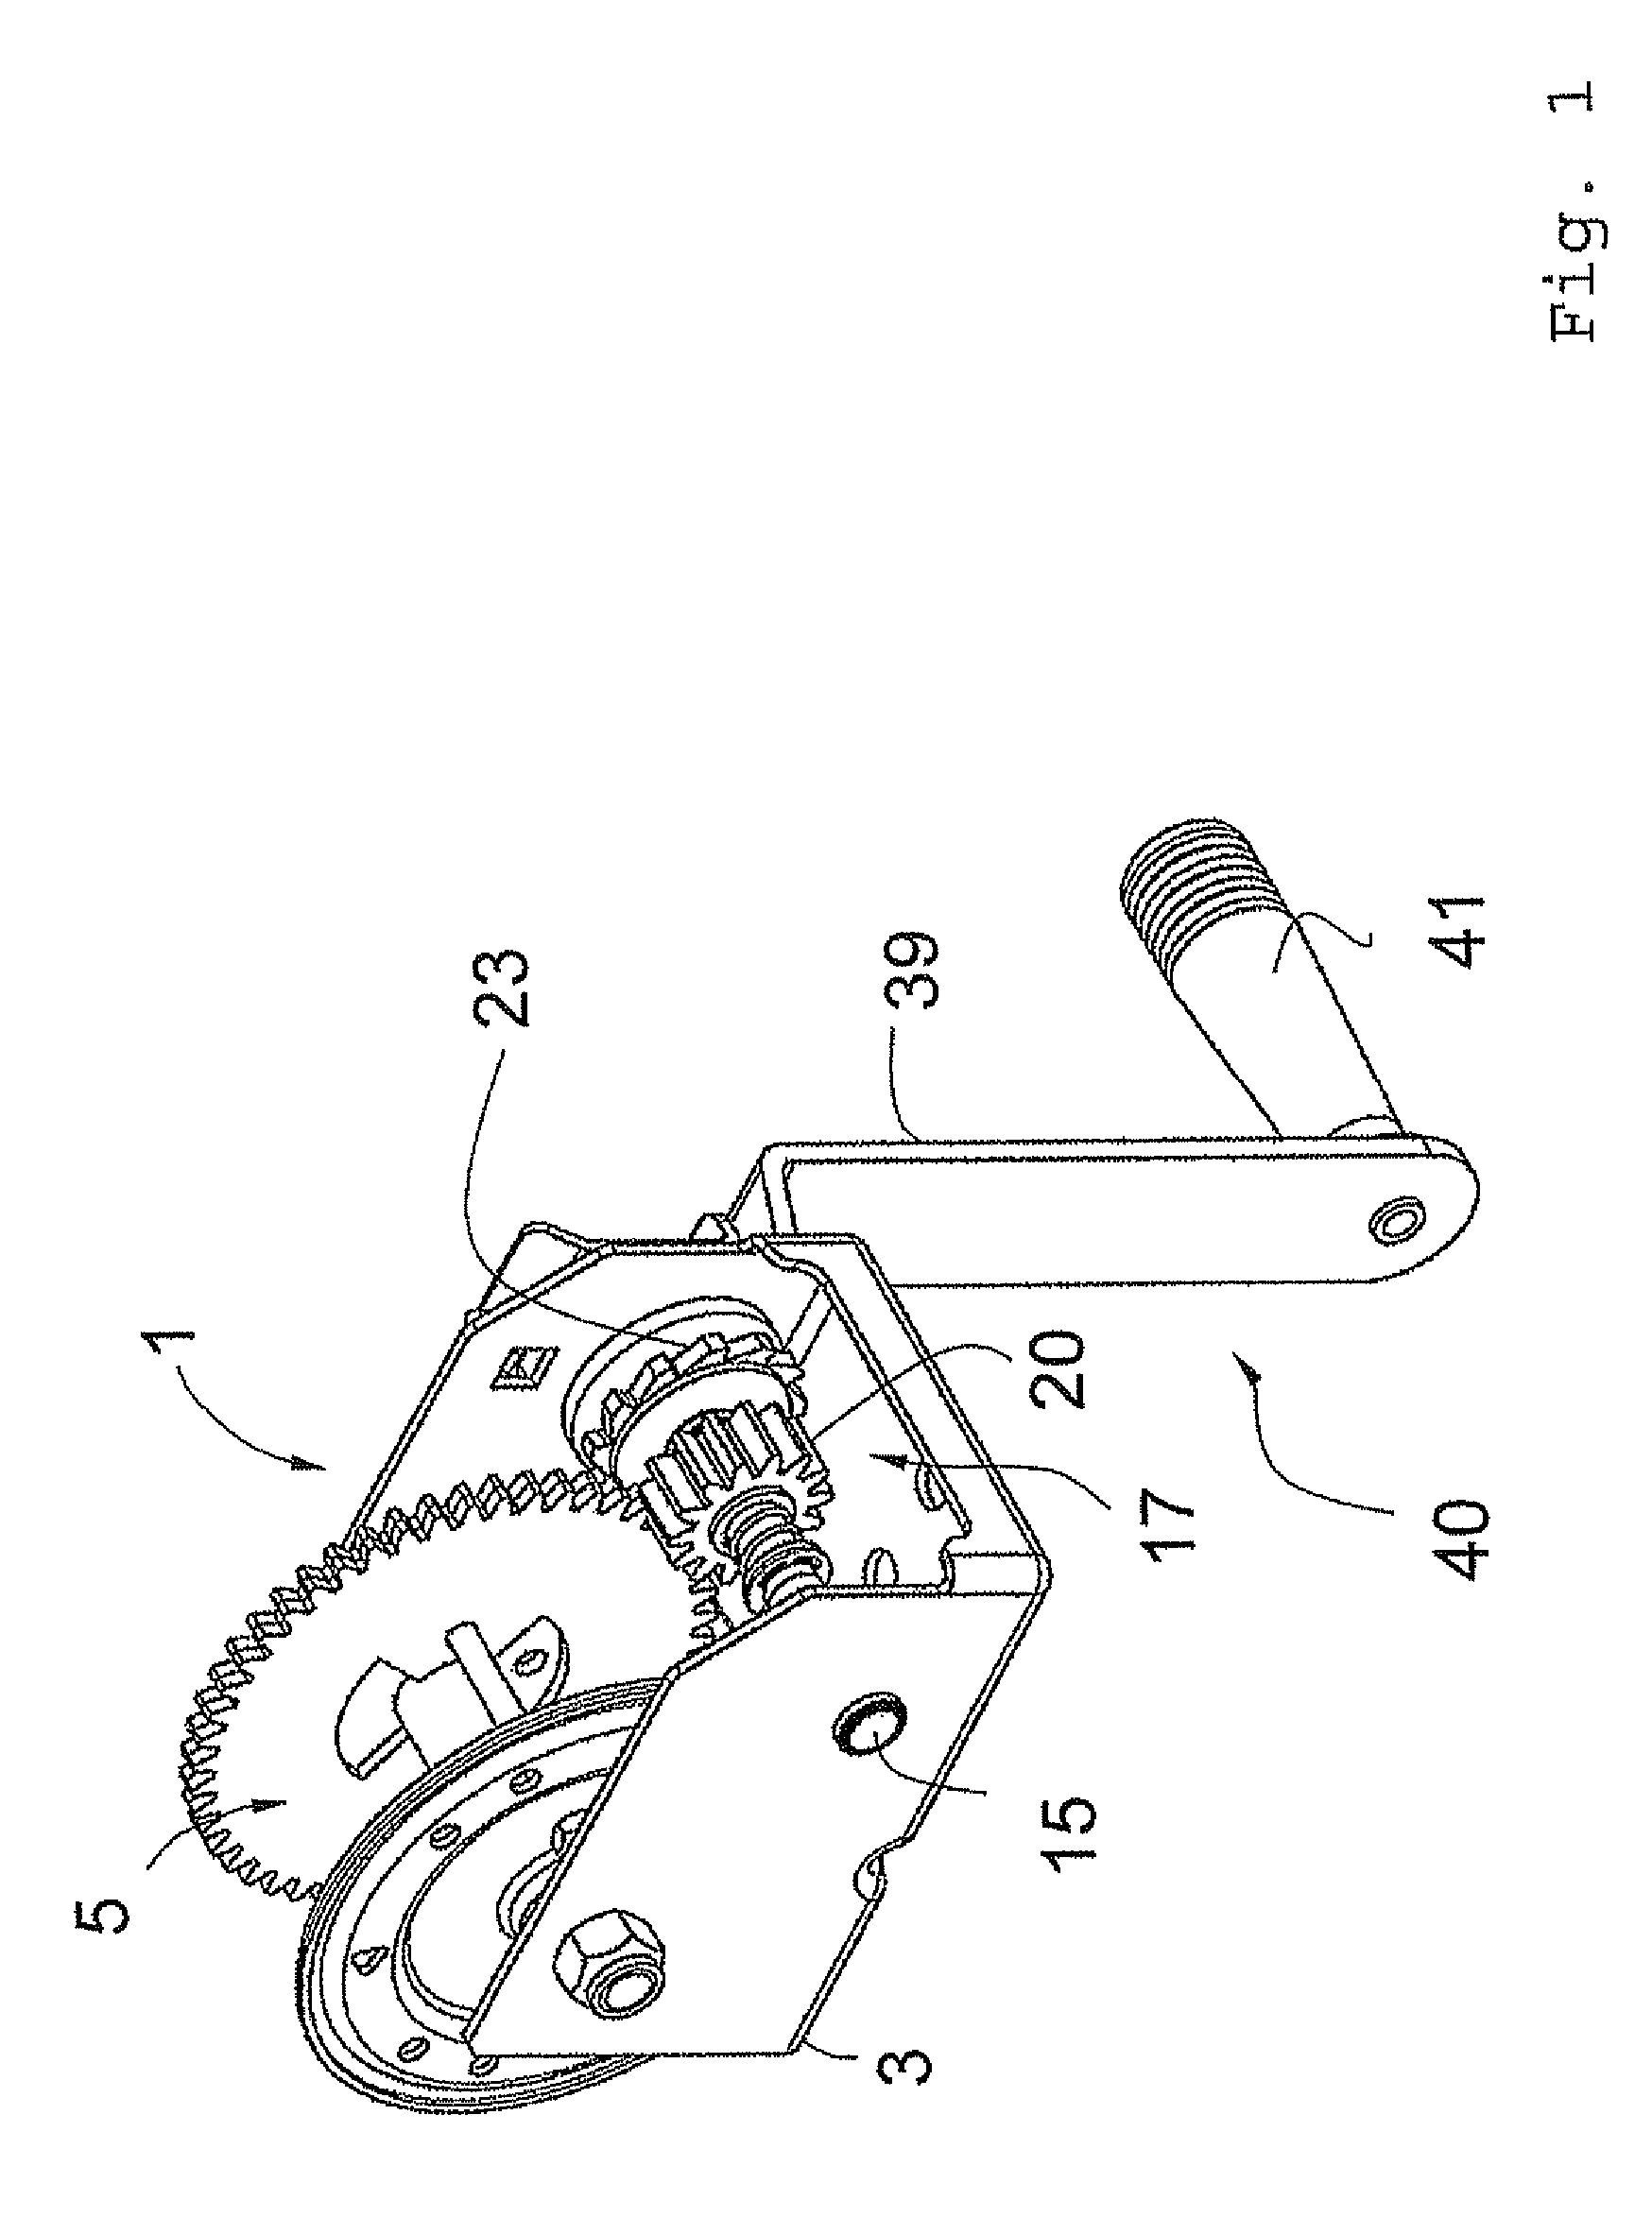 Hand winch with brake and freewheel